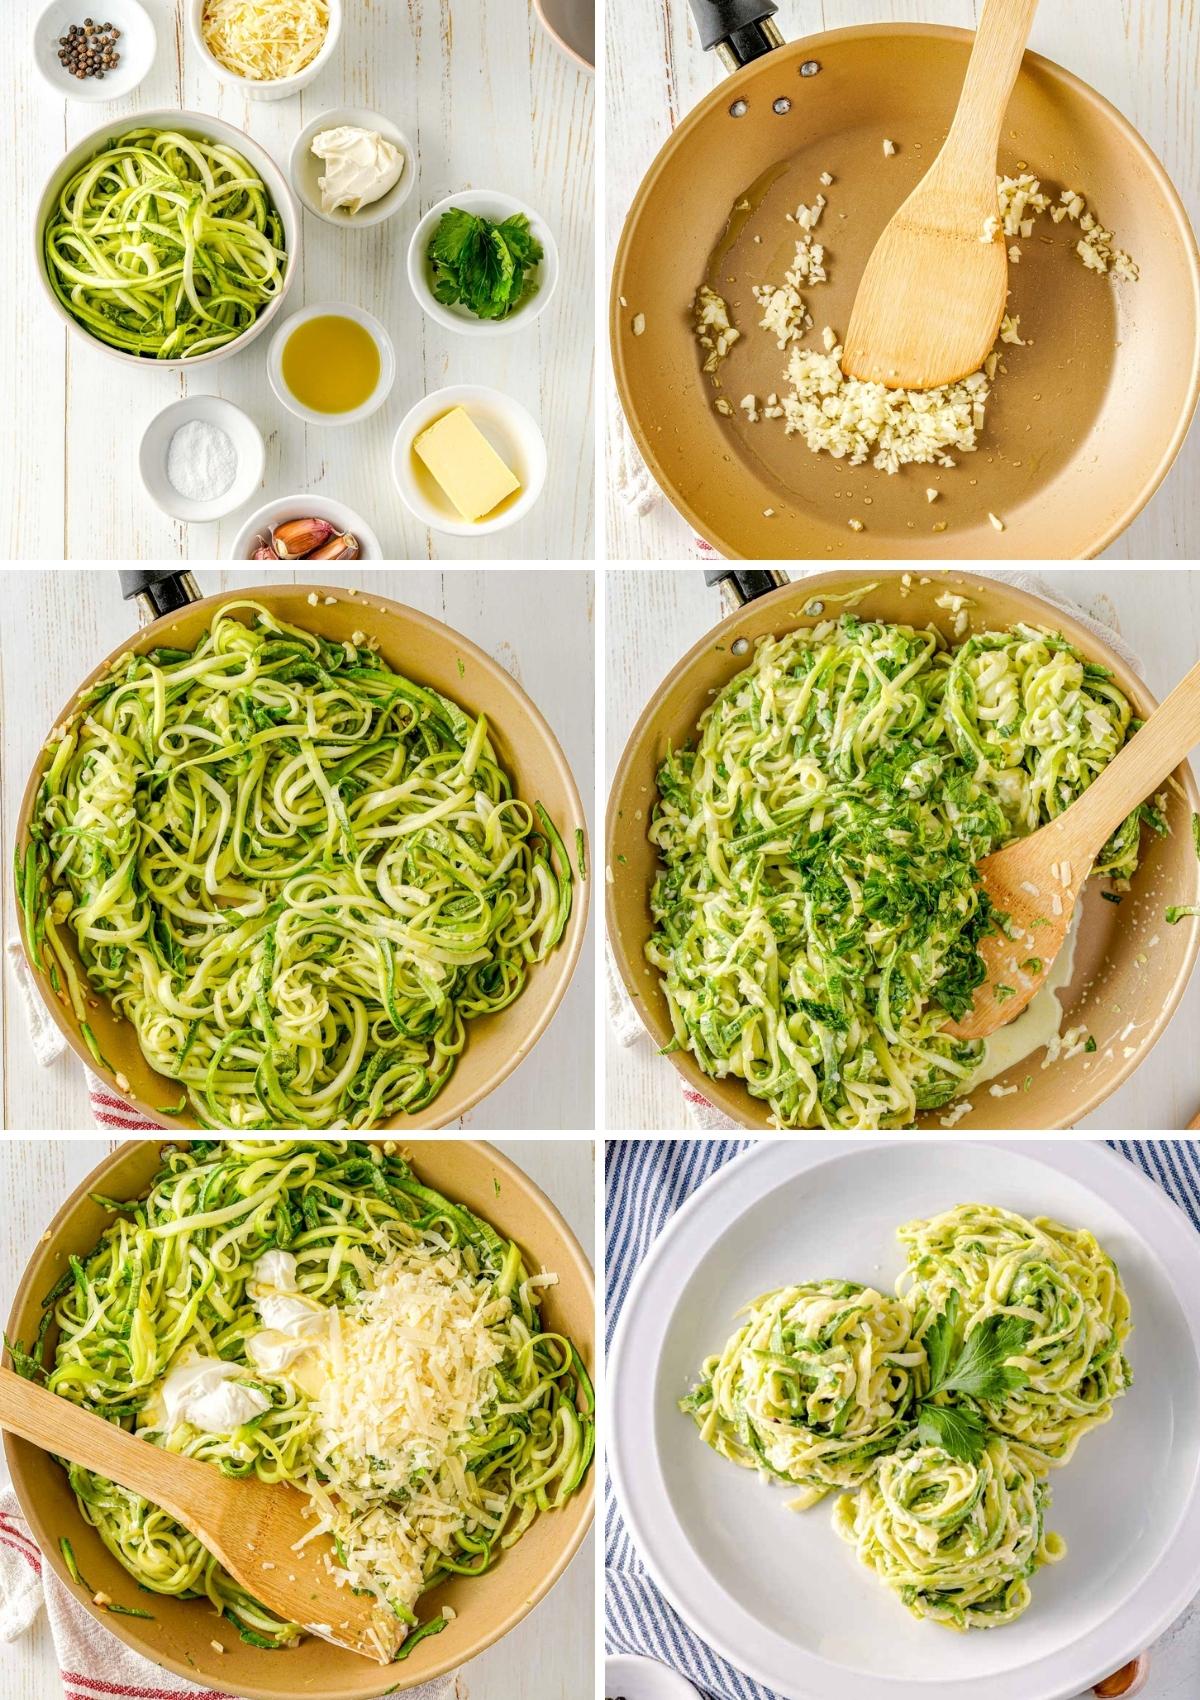 steps for making creamy zoodles, including sautéing garlic, adding zoodles, adding parsley and cream cheese, then serving with grated parmesan